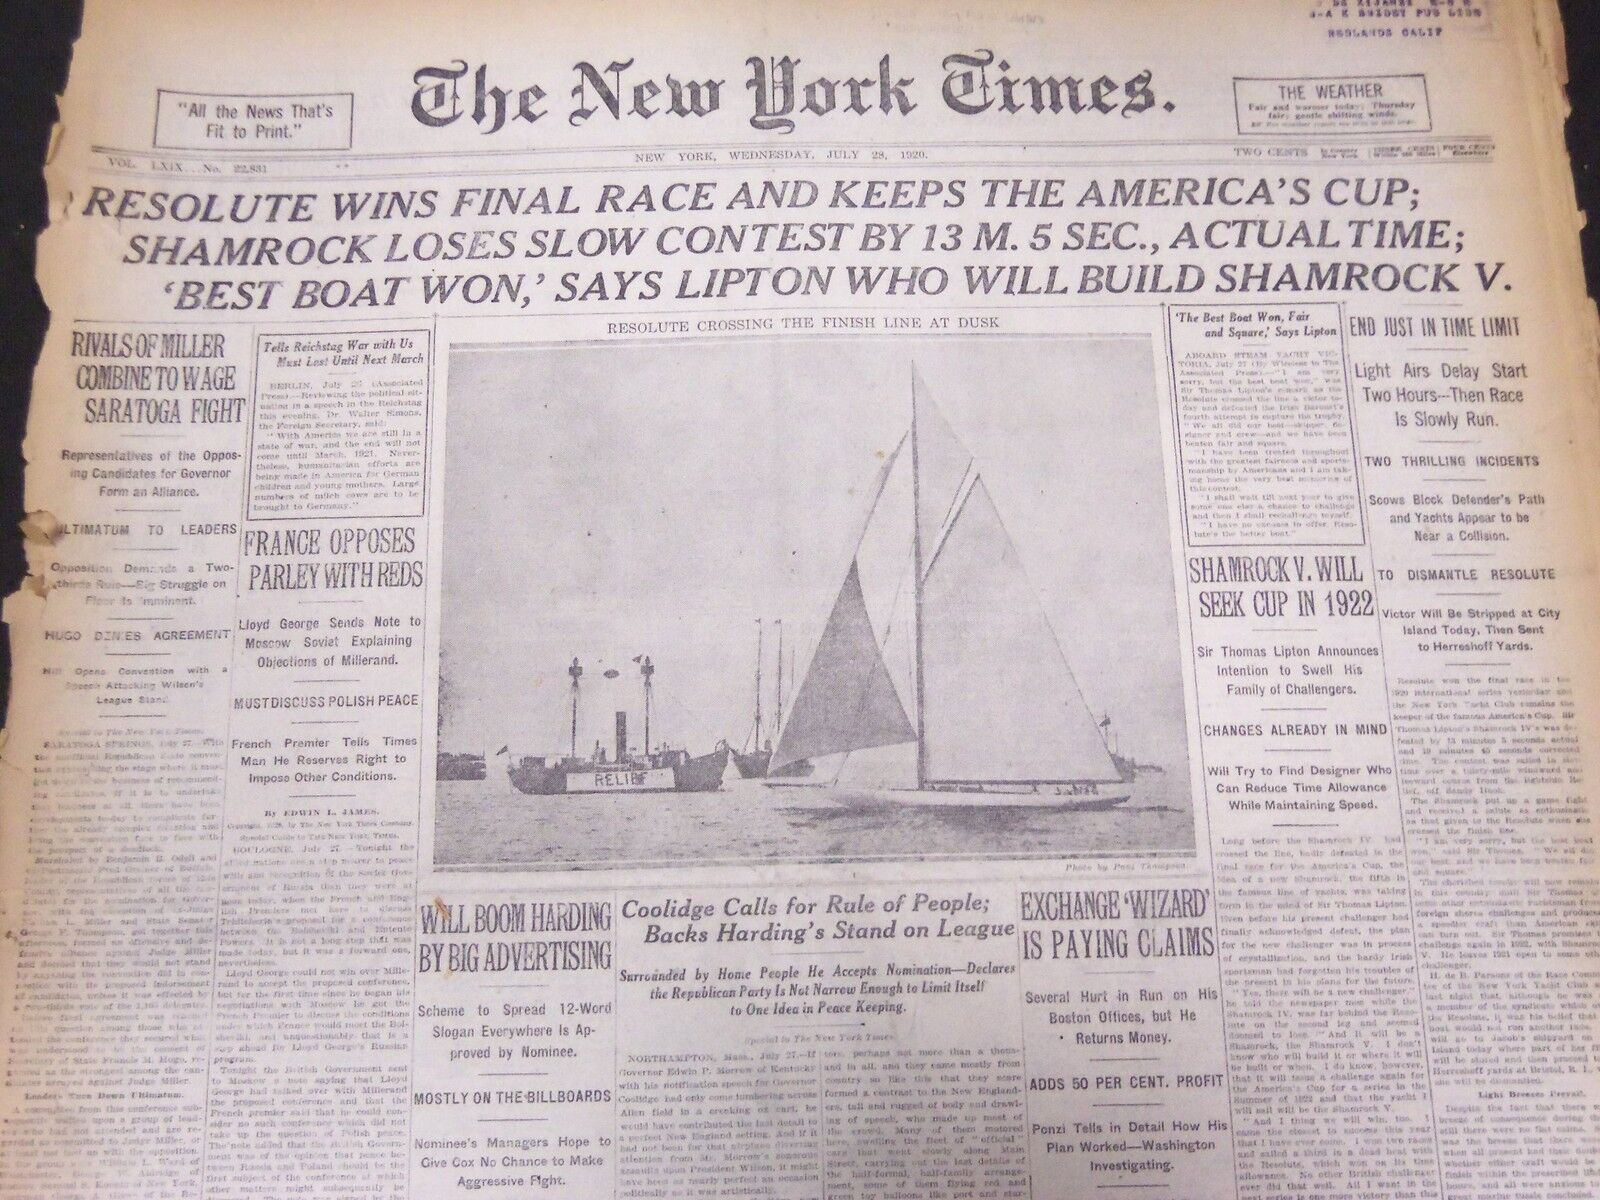 1920 JULY 28 NEW YORK TIMES - RESOLUTE WINS FINAL RACE AND KEEPS CUP - NT 5366